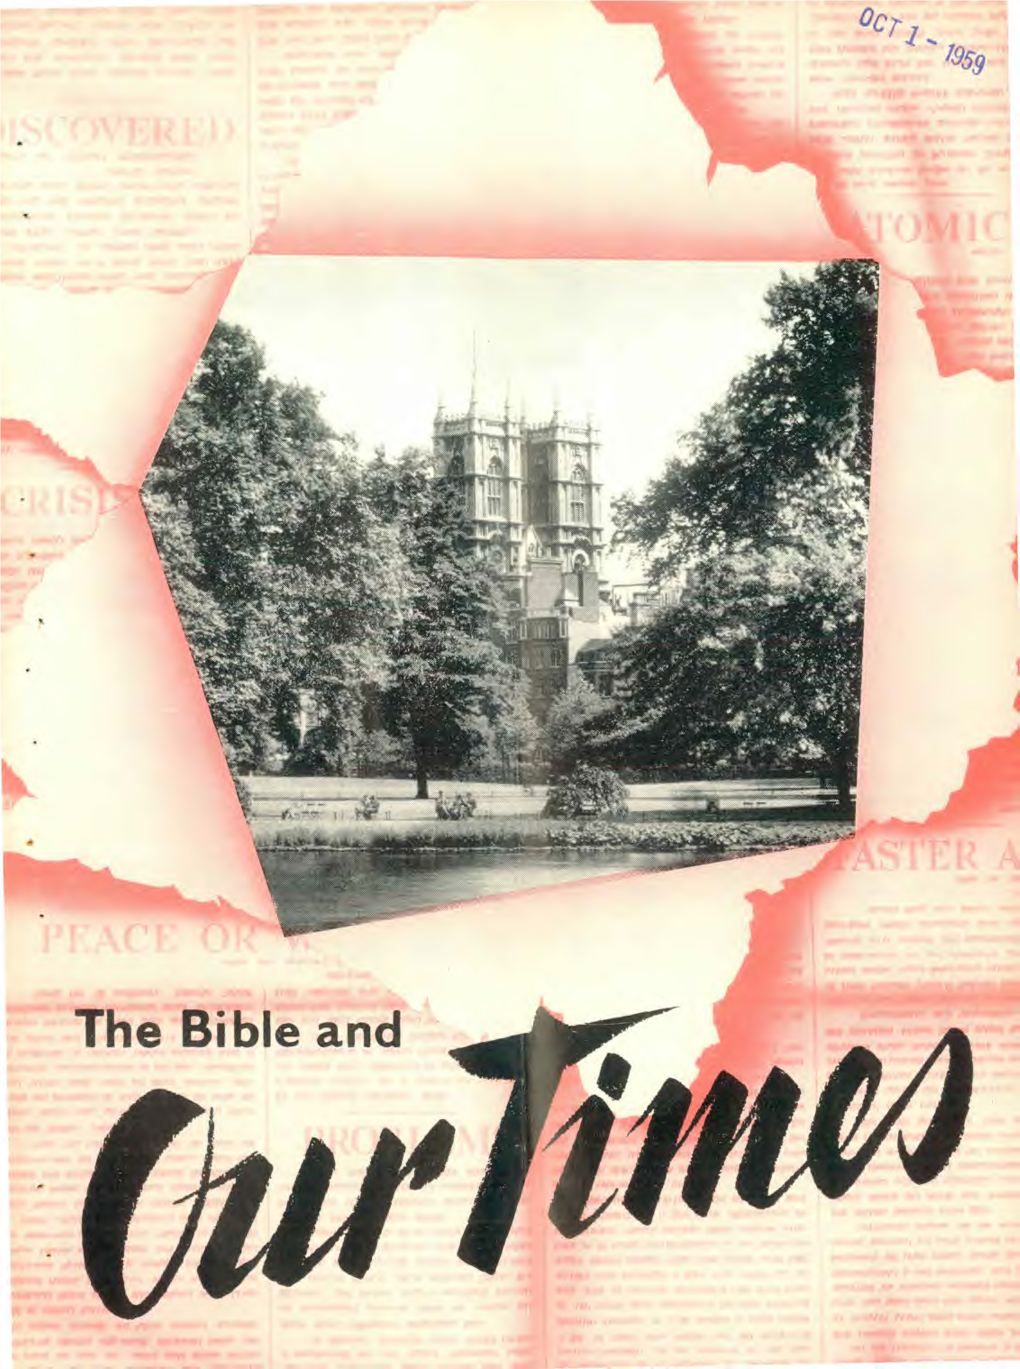 The Bible and Our Times for 1959